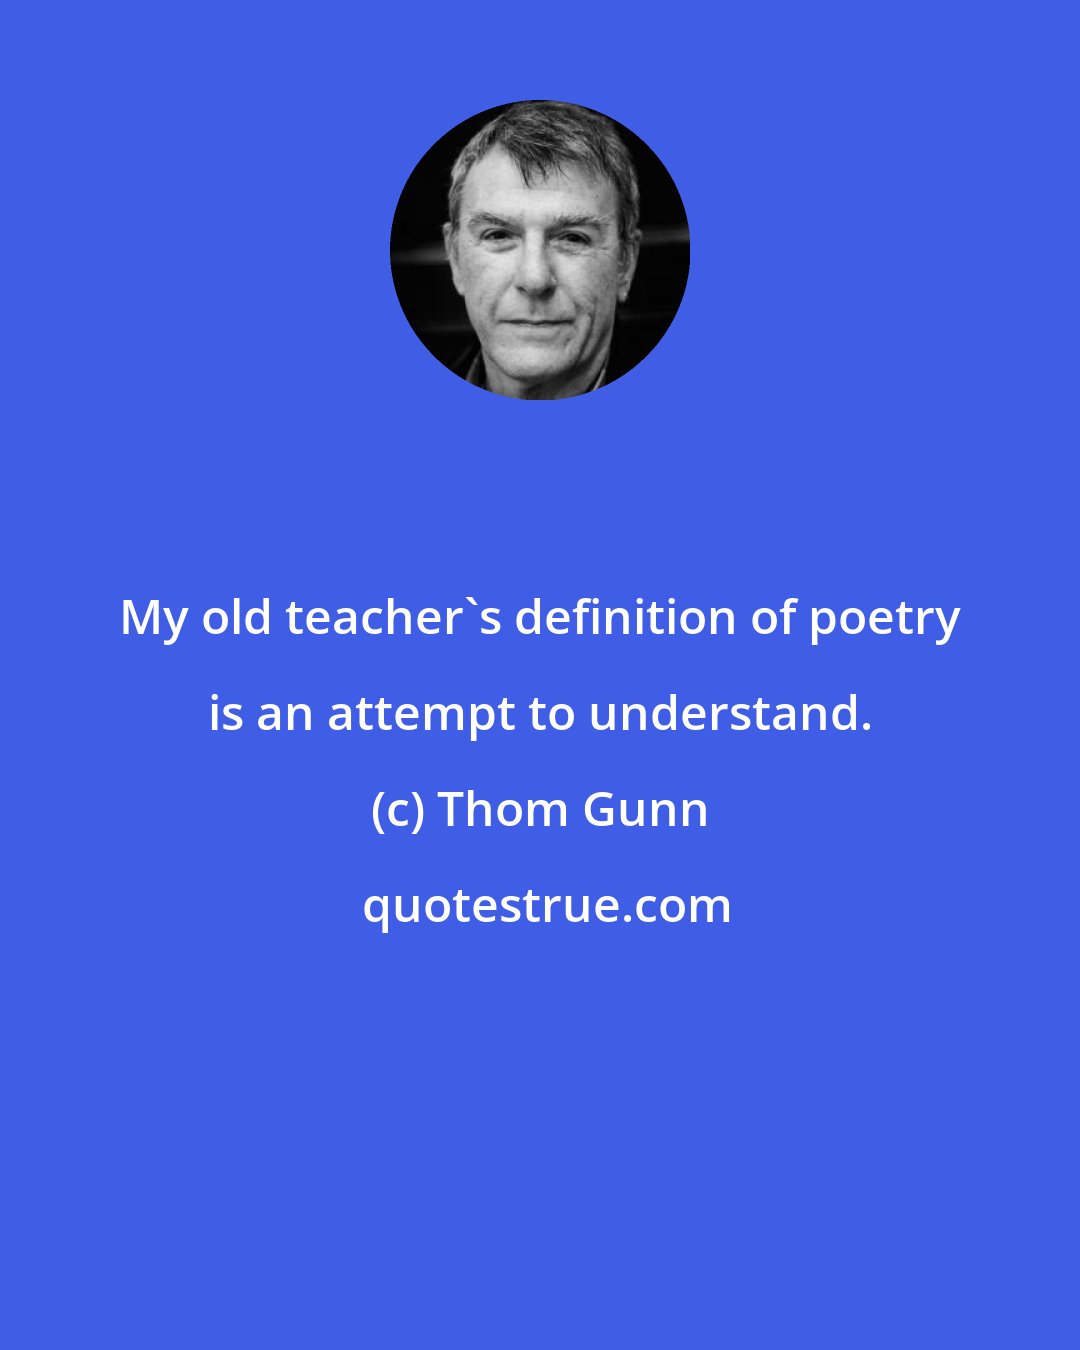 Thom Gunn: My old teacher's definition of poetry is an attempt to understand.